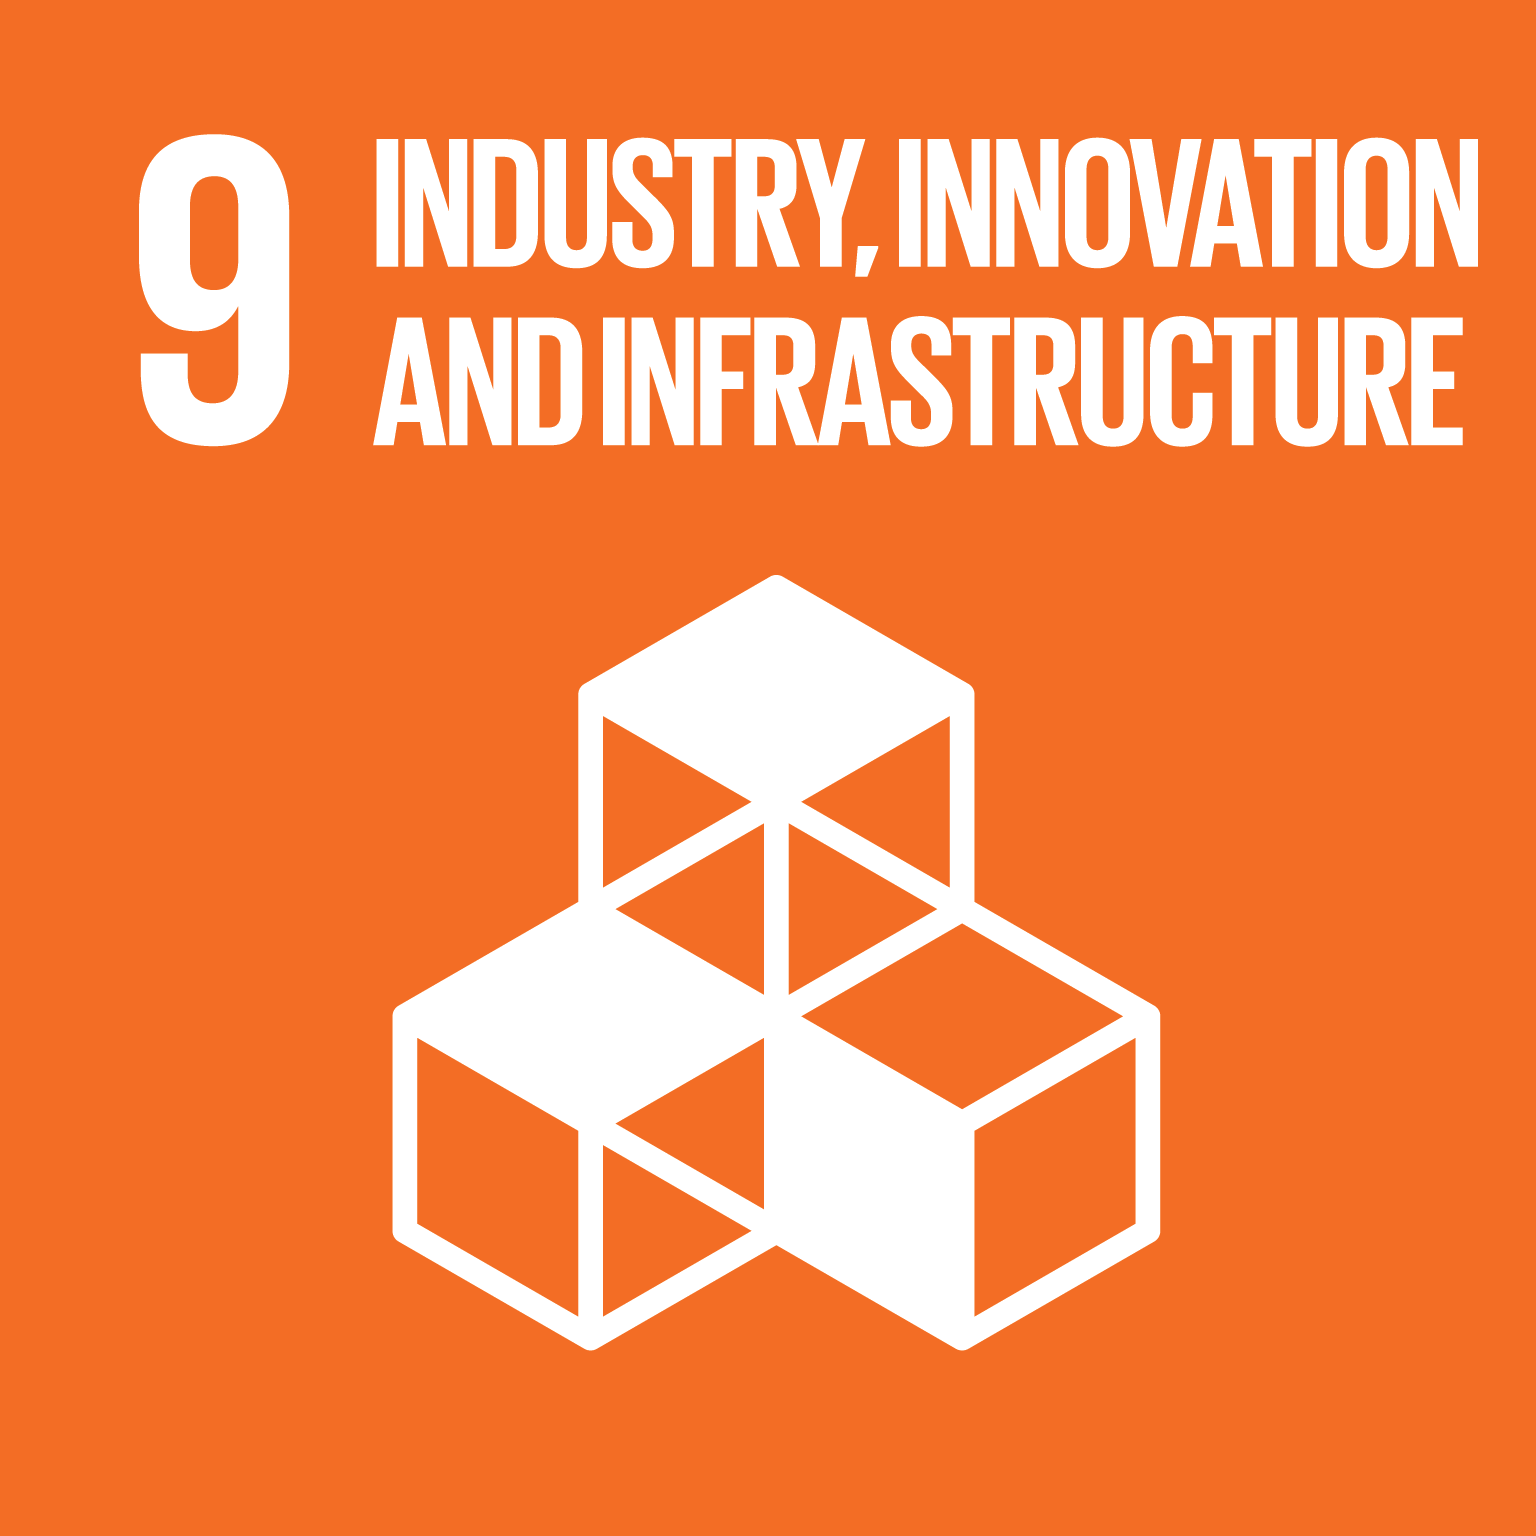 Goal 9 - industry, innovation and infrastructure